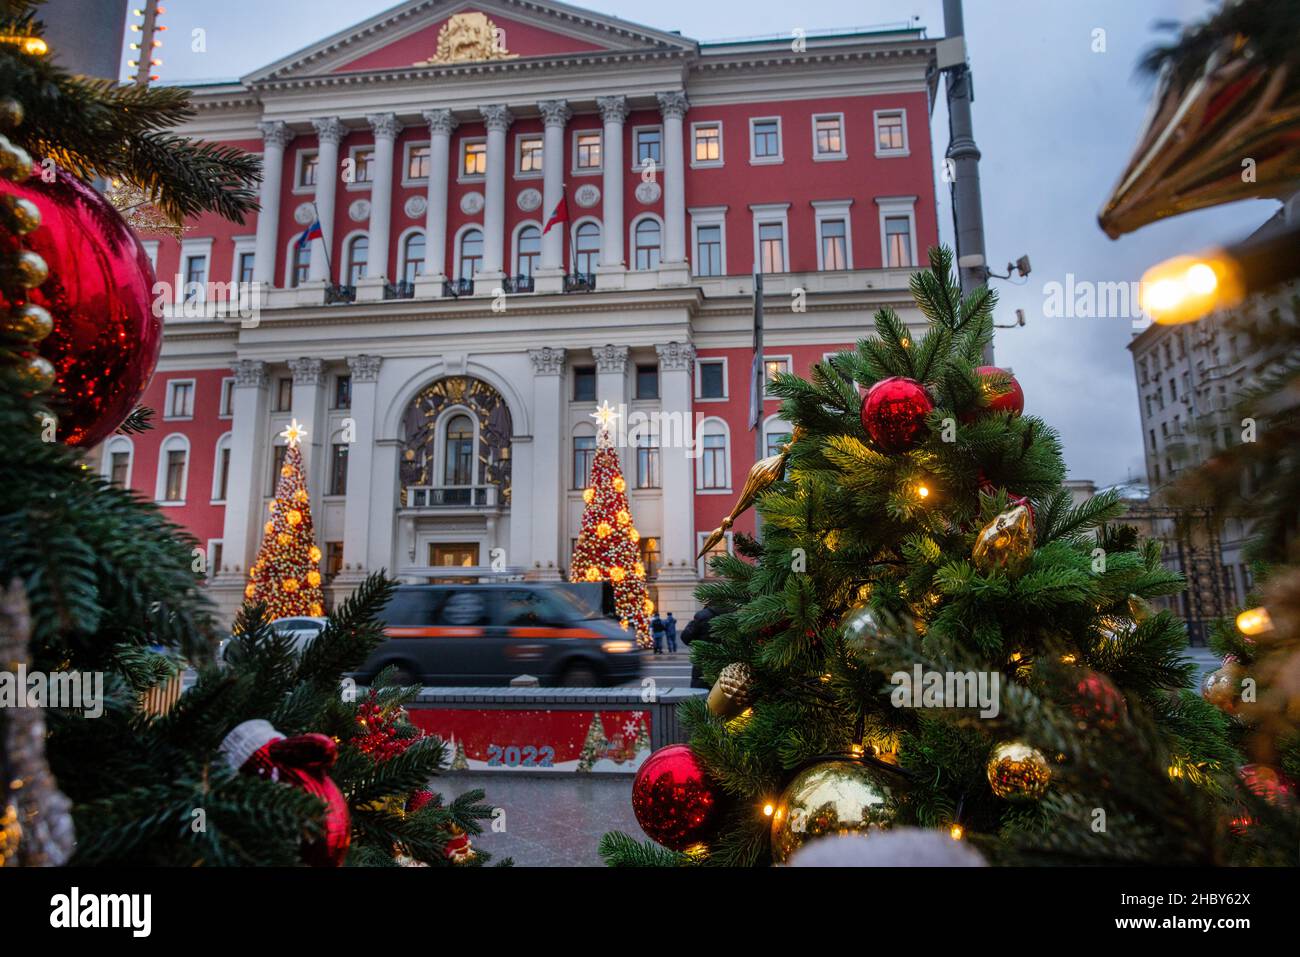 The building of the City Hall is decorated with 2 Christmas trees and opposite, on the square with a statue of Yuri Dolgoruky, there are also many Chr Stock Photo